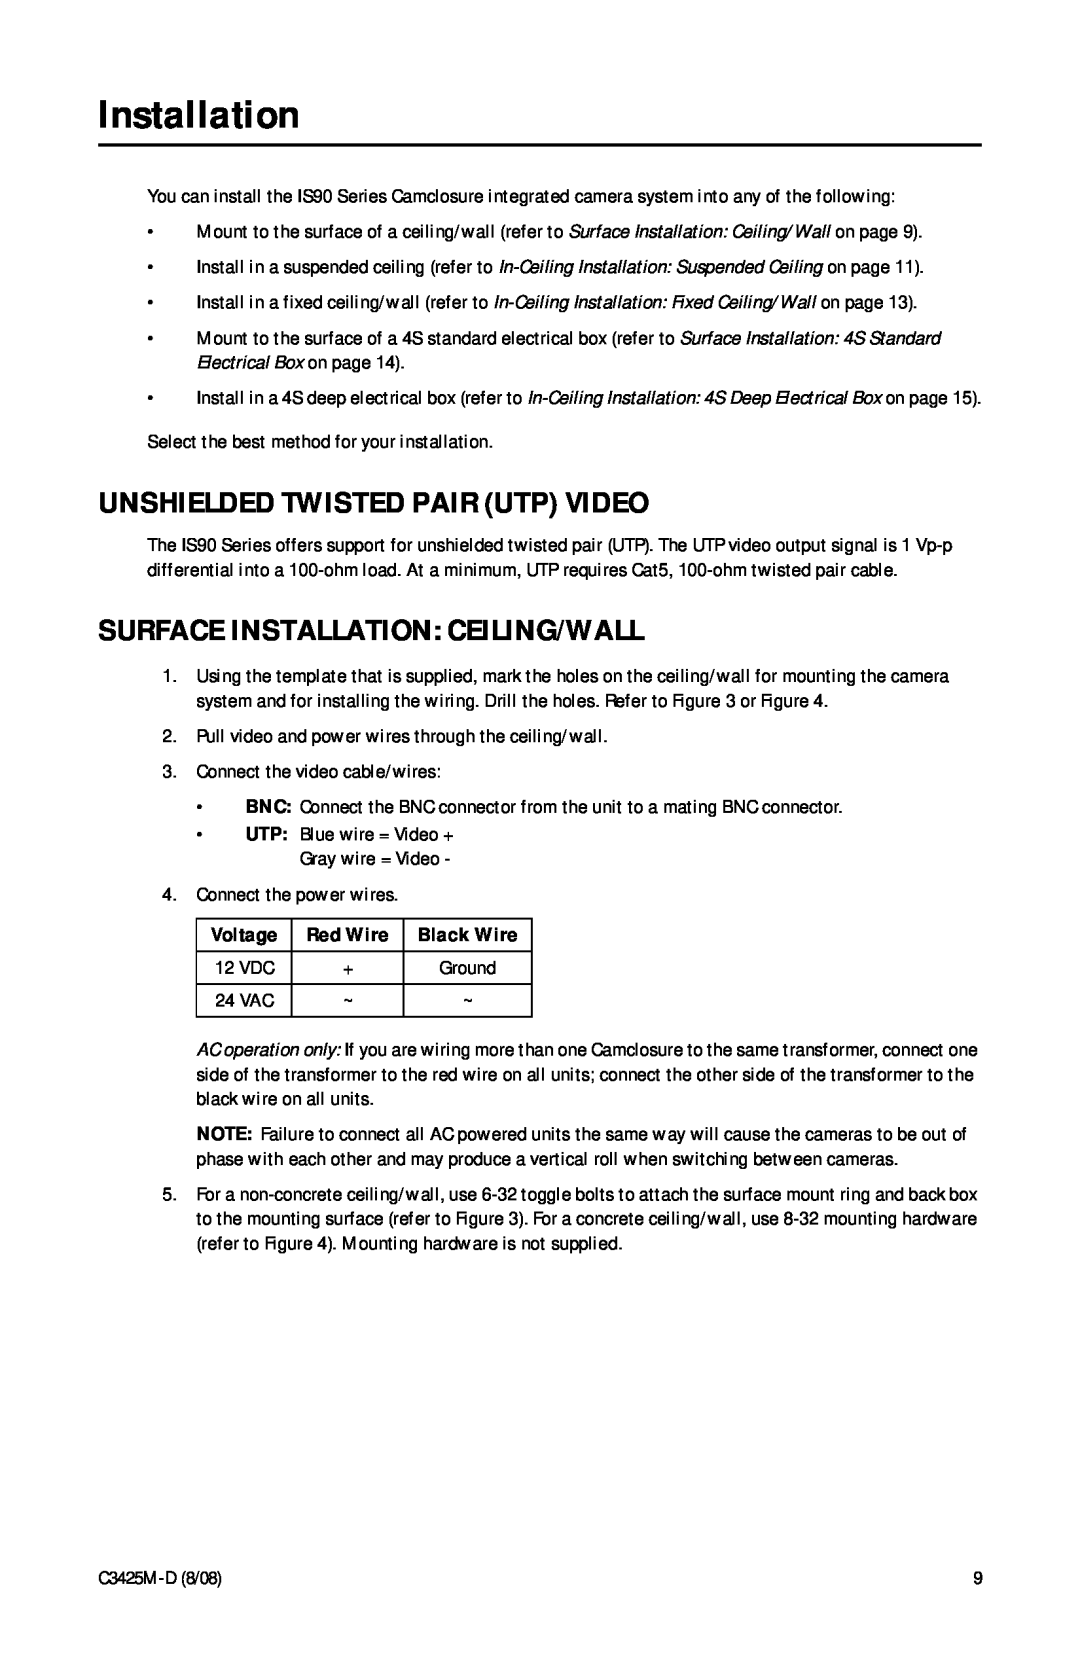 Pelco C3425M-D manual Unshielded Twisted Pair Utp Video, Surface Installation Ceiling/Wall 